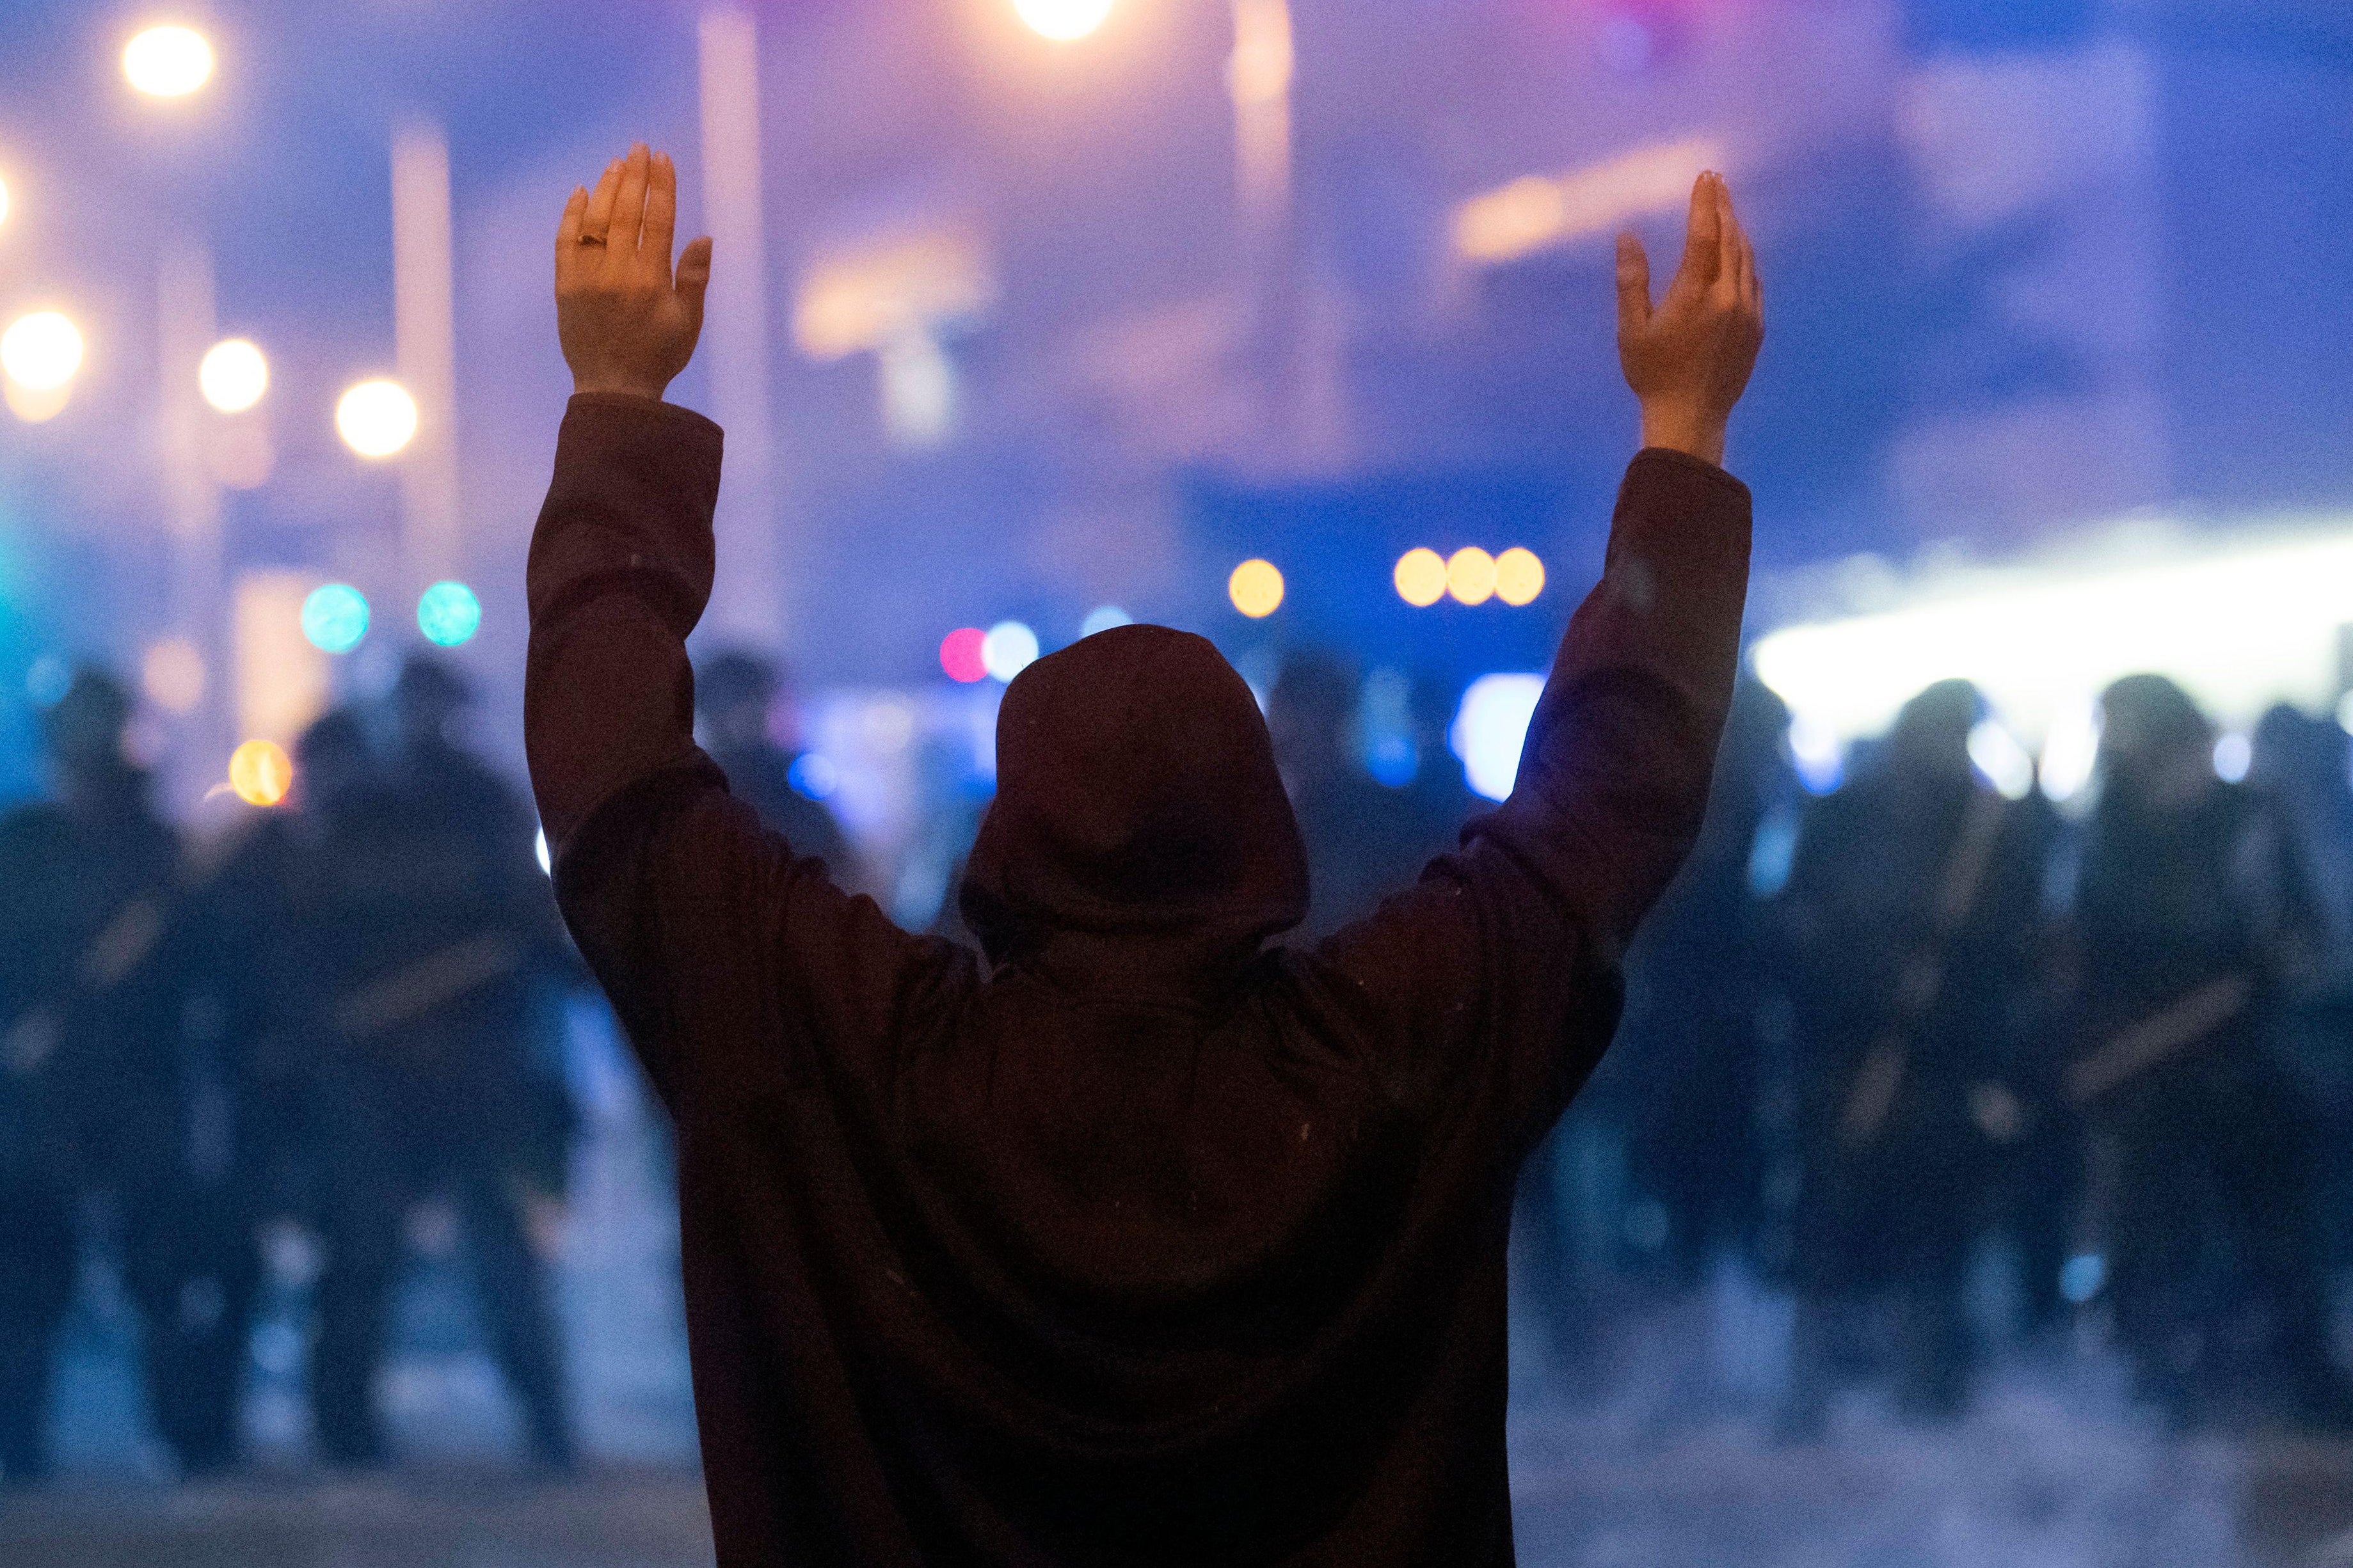 A protester faces off with police during rioting and protests in Atlanta on May 29, 2020. 